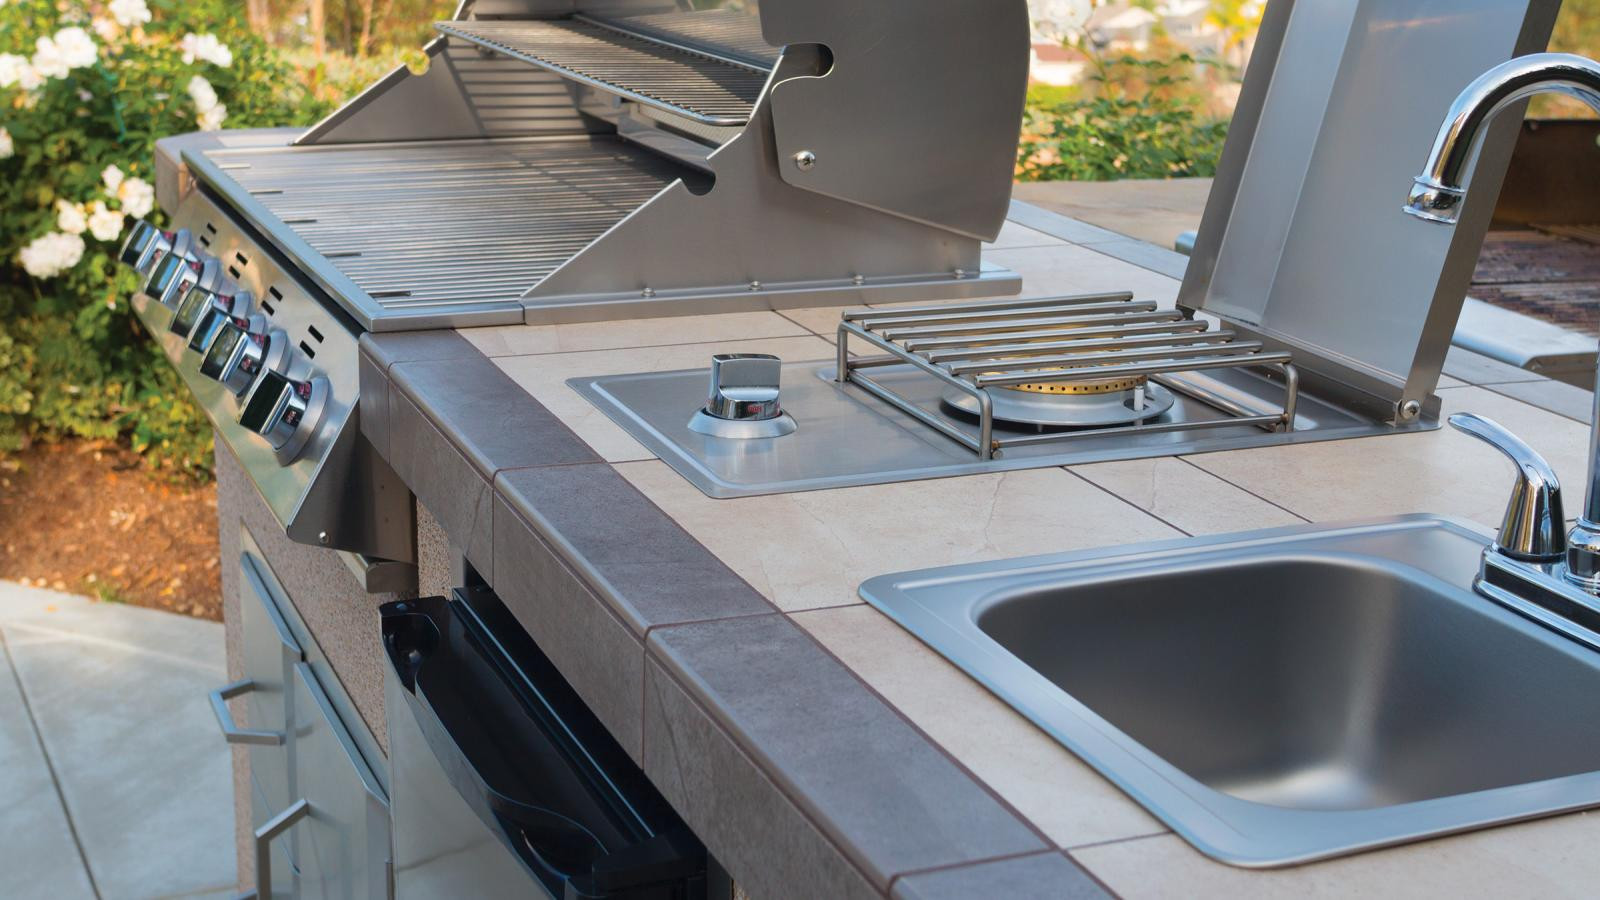 Outdoor Kitchen Sinks And Faucets
 Sink with Faucet Outdoor Kitchen ponents